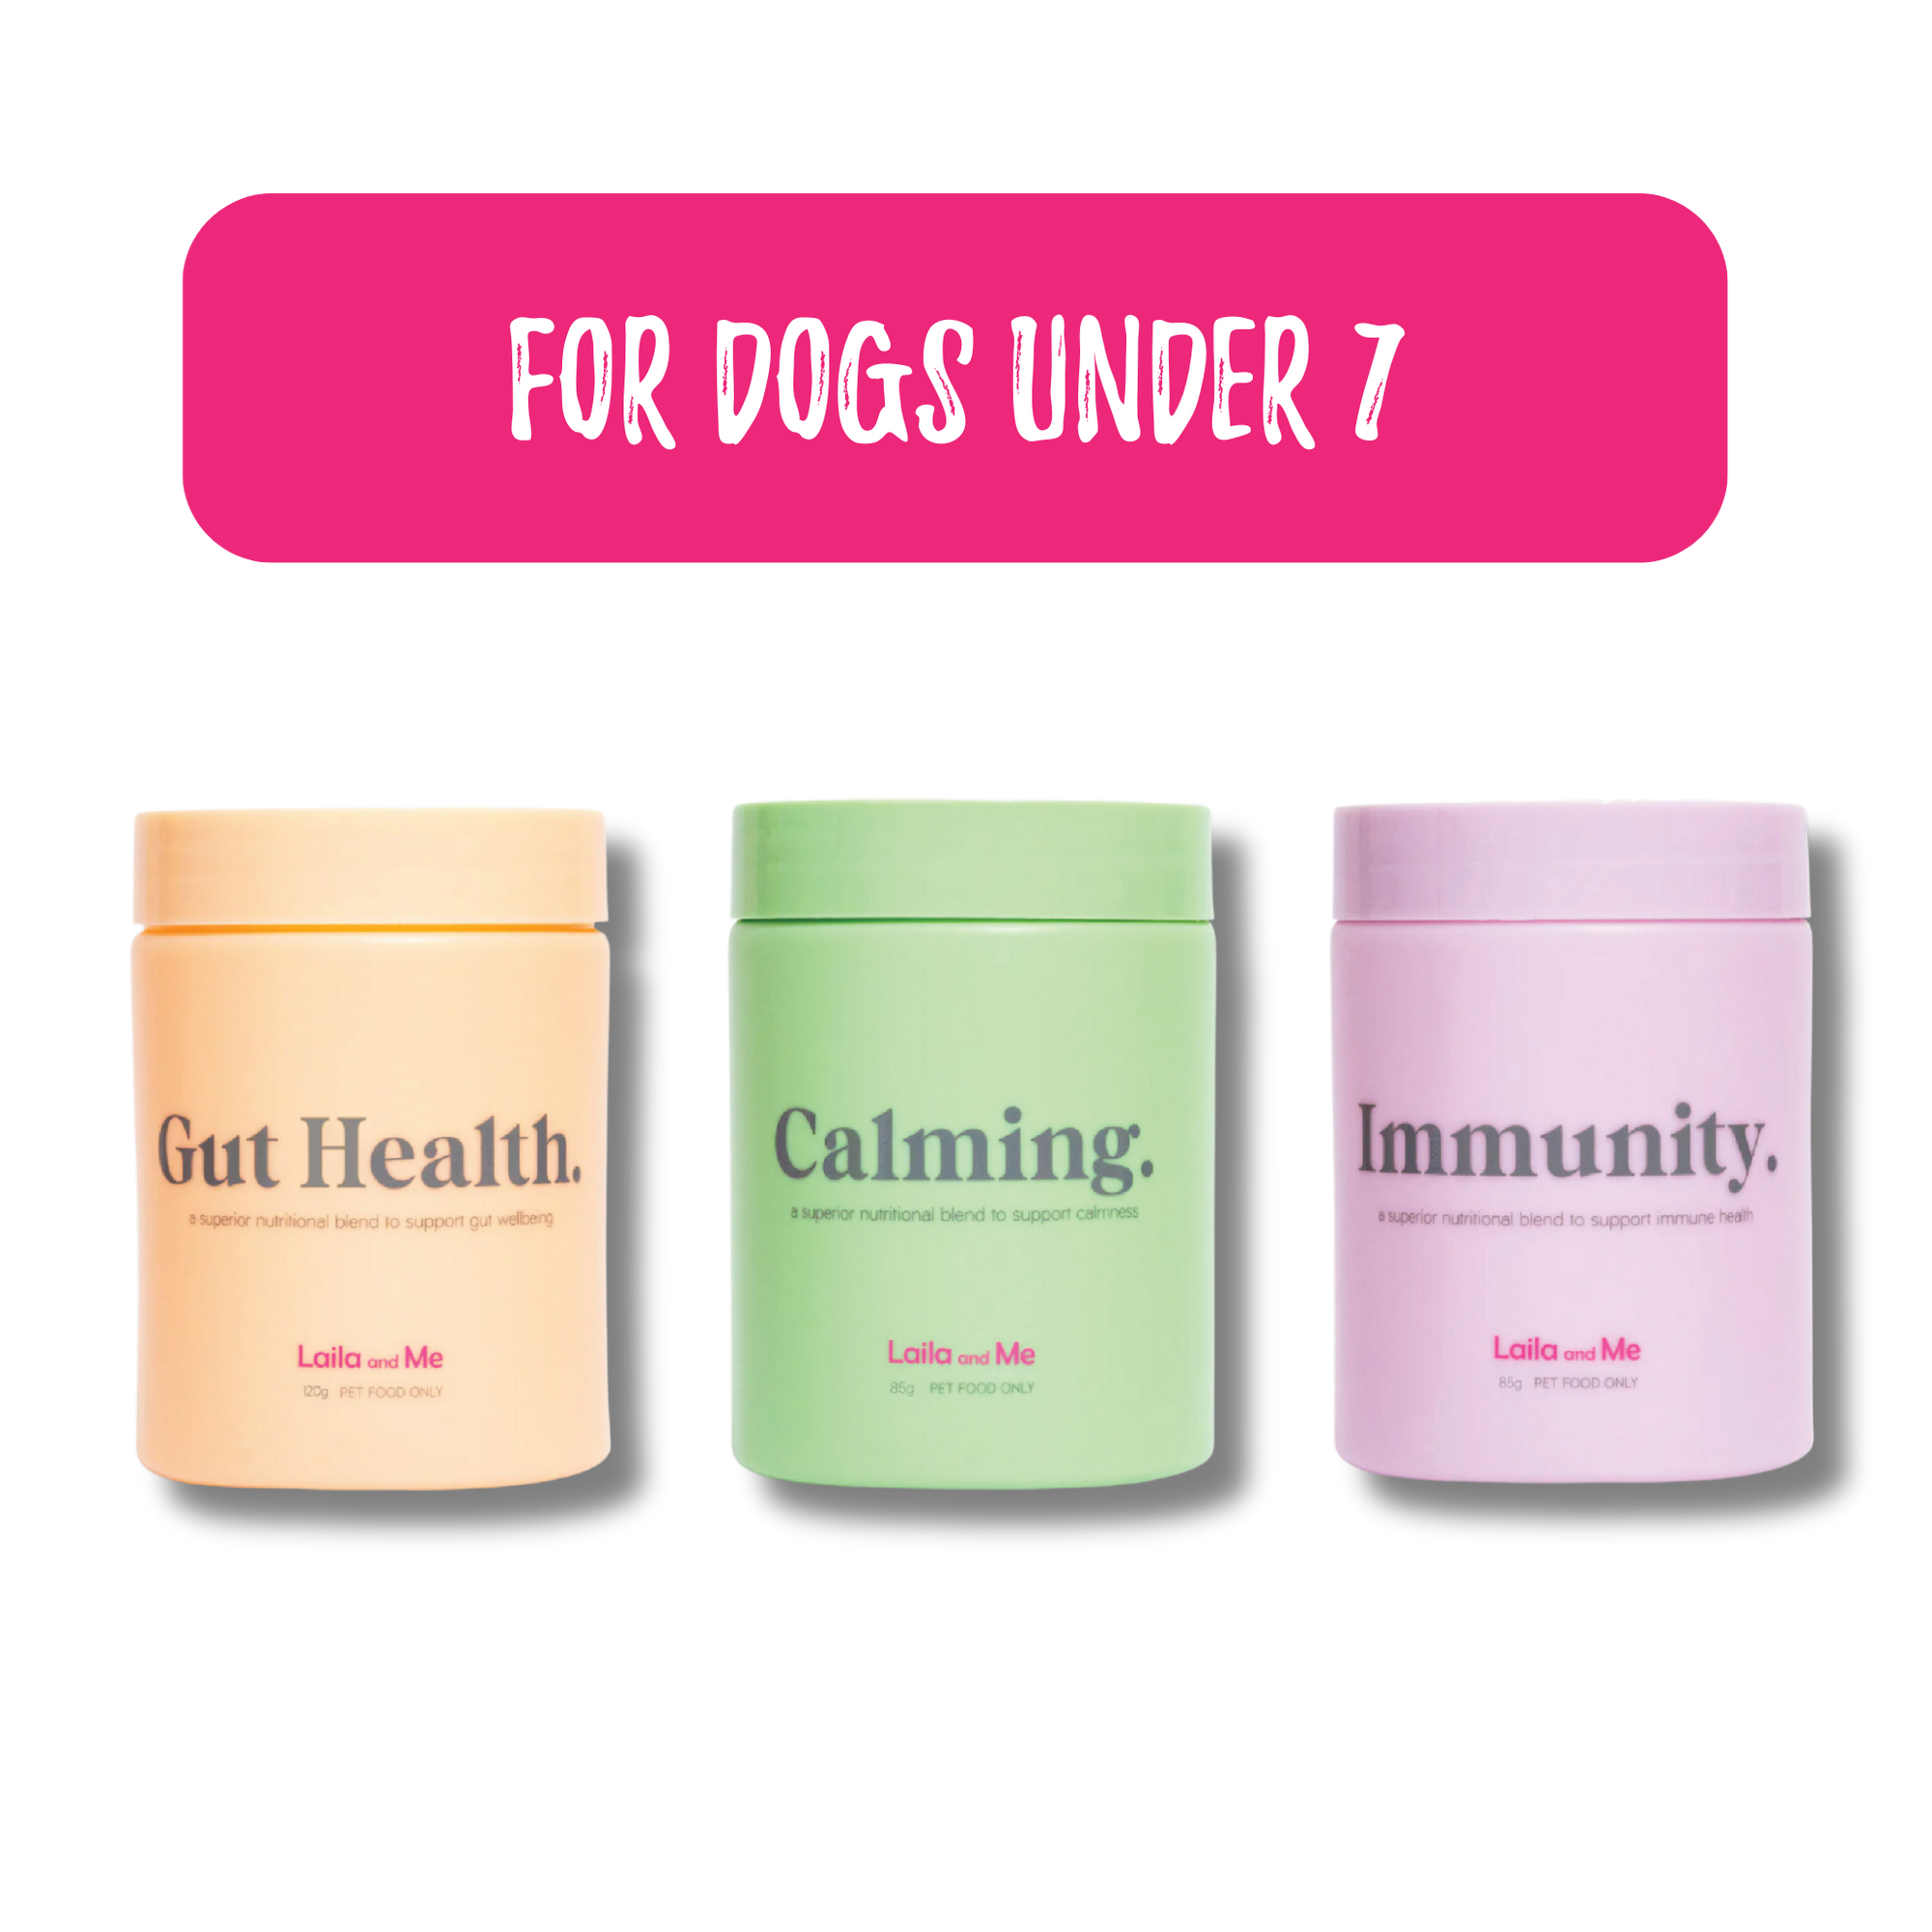 Supplements for dogs under seven - Laila and Me